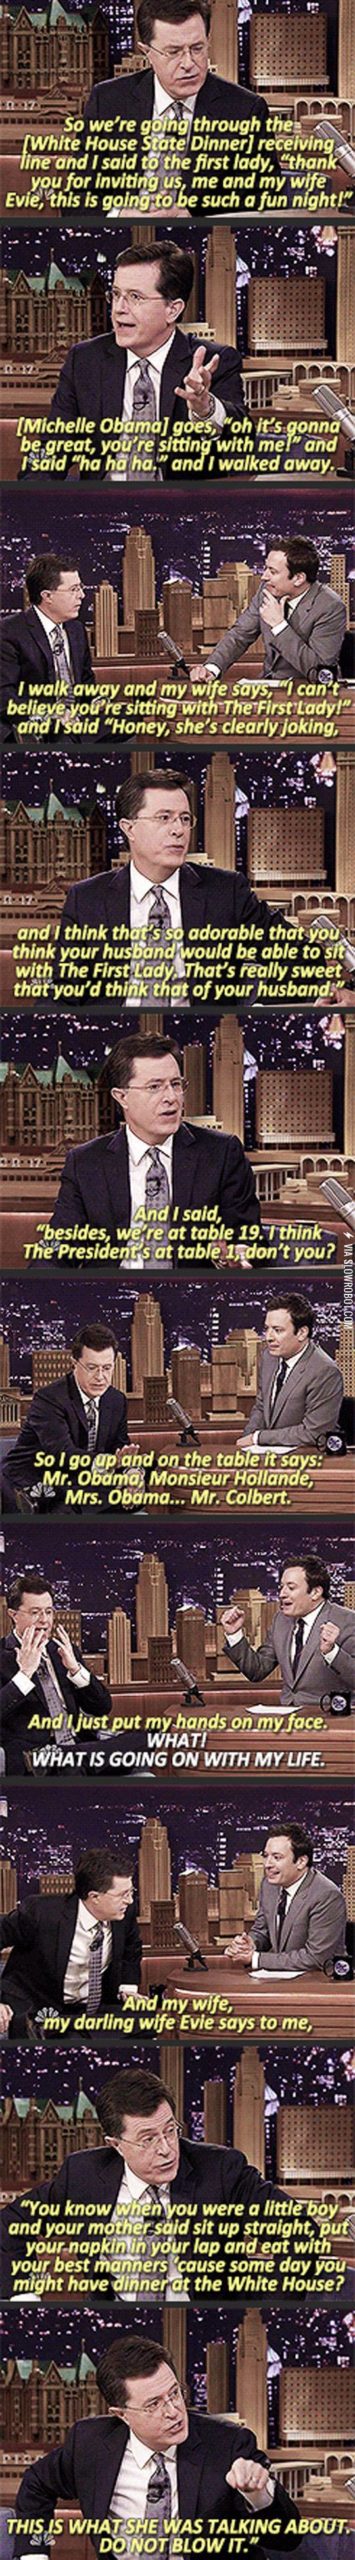 Colbert+at+the+White+House.